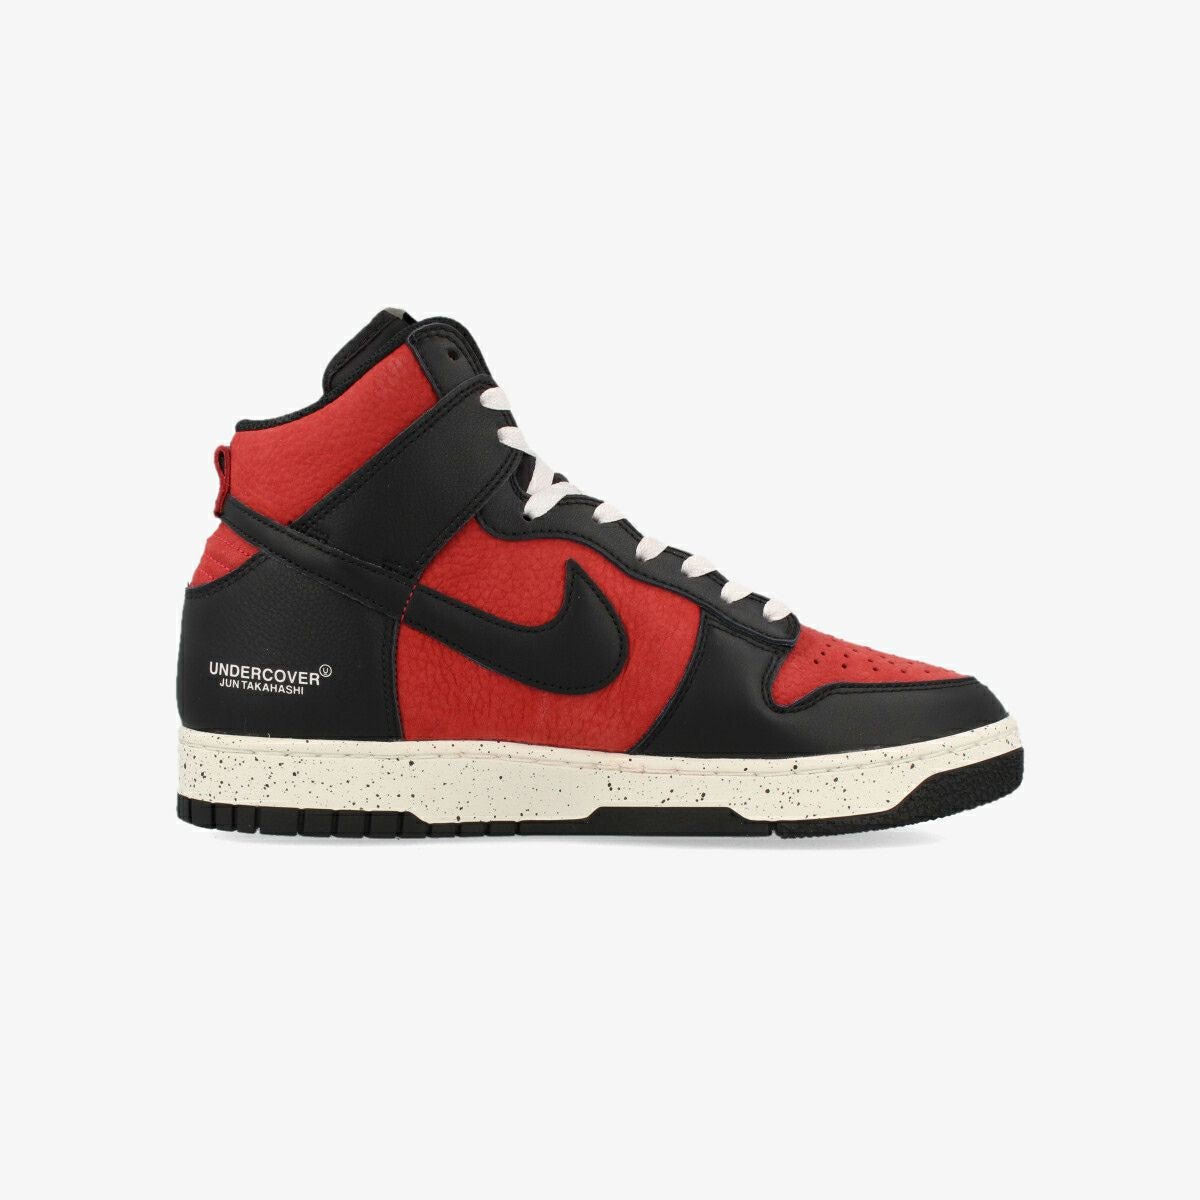 NIKE DUNK HIGH 1985 GYM RED/BLACK/WHITE 【UNDERCOVER】 dd9401-600